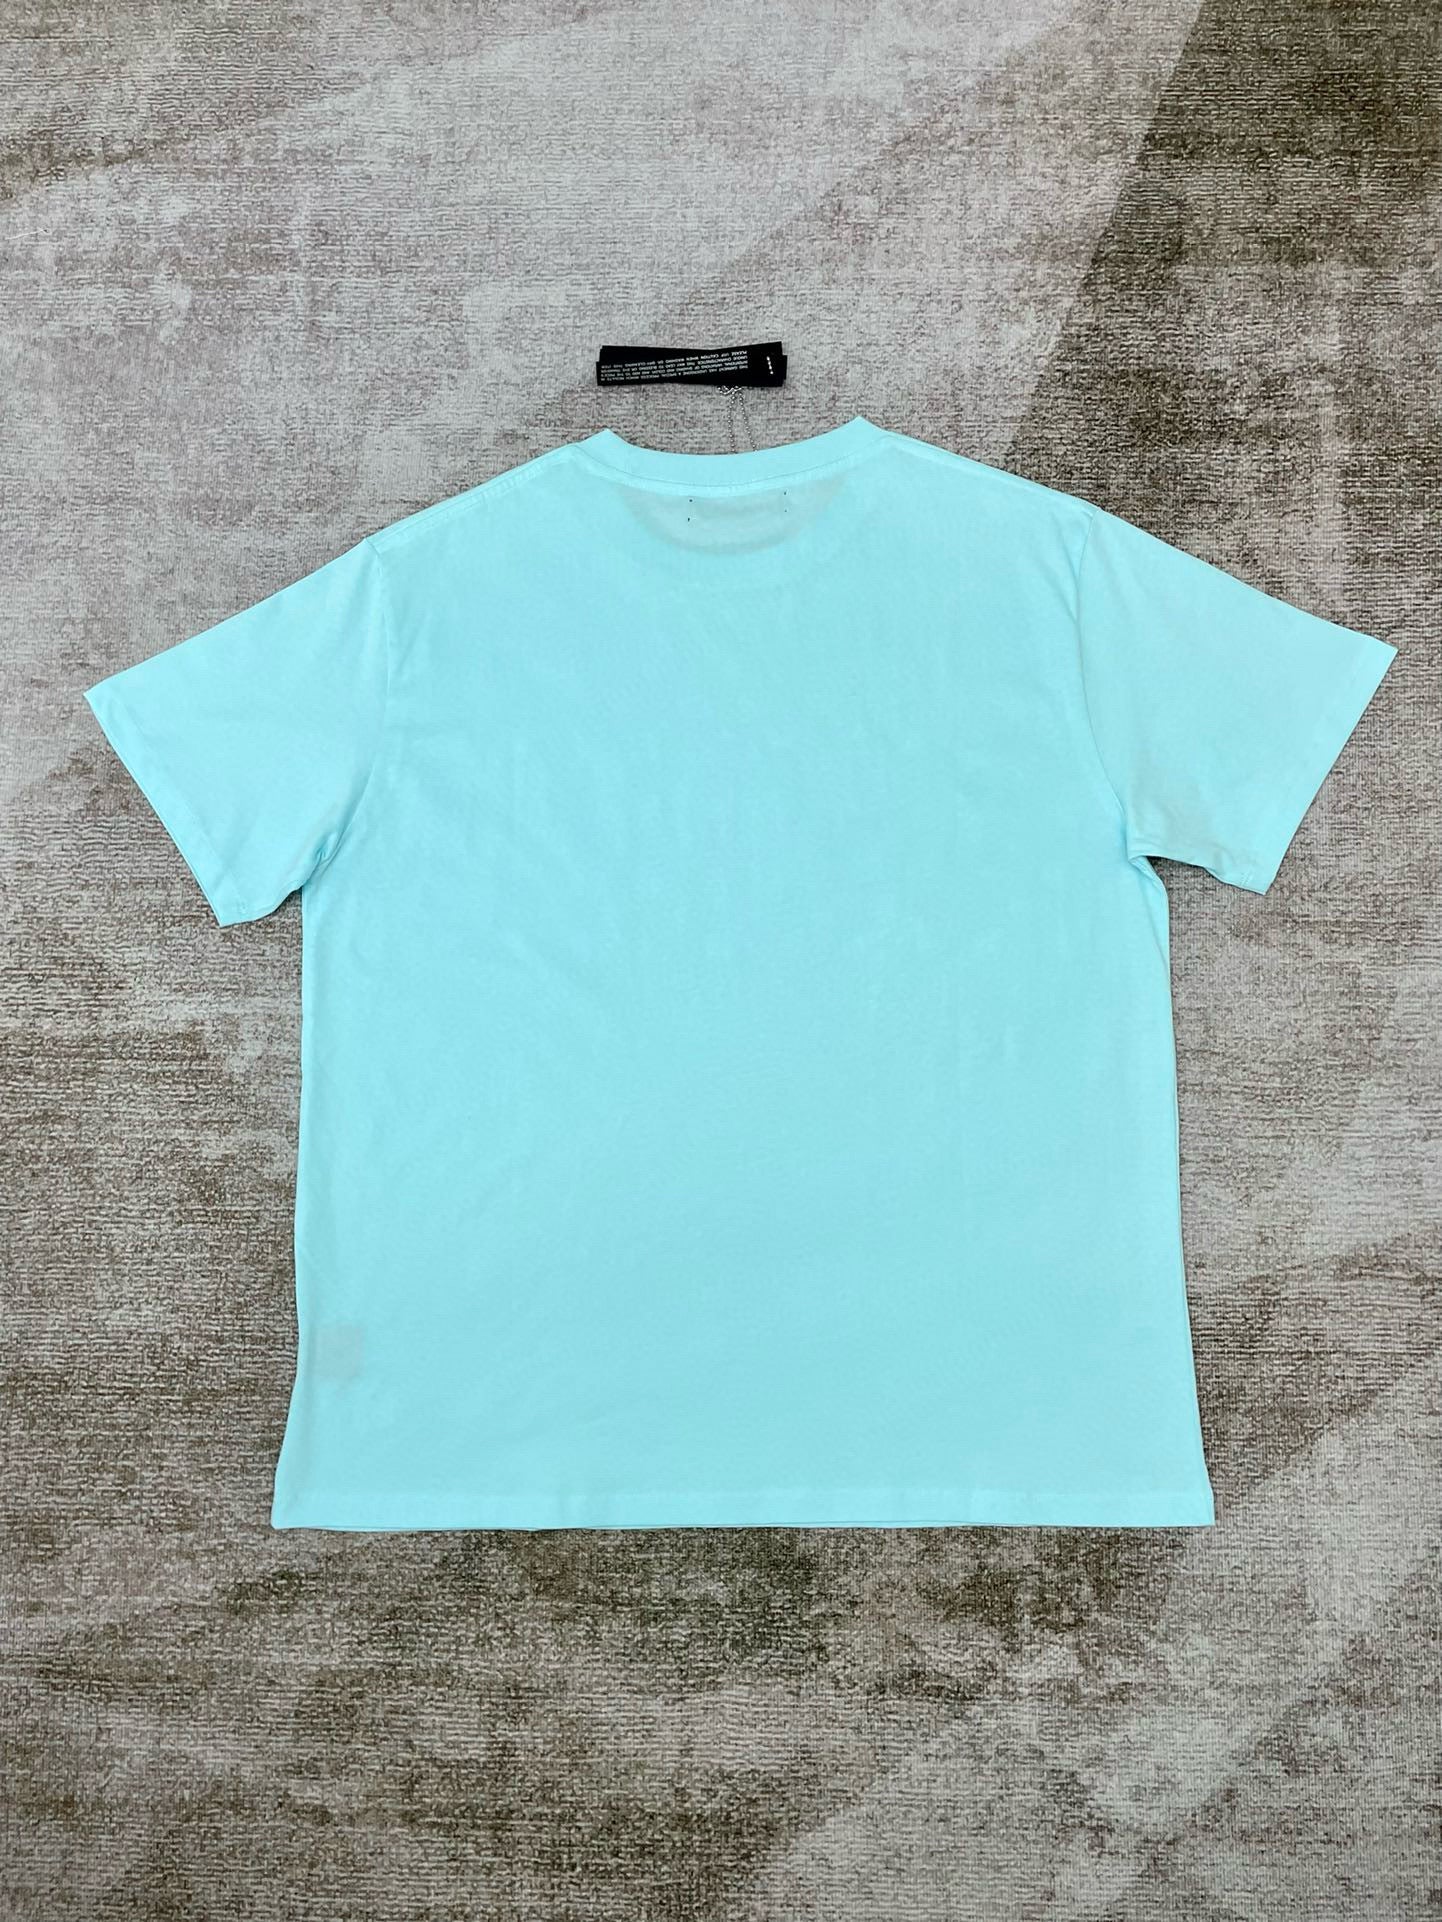 Sky blue and White T-shirt